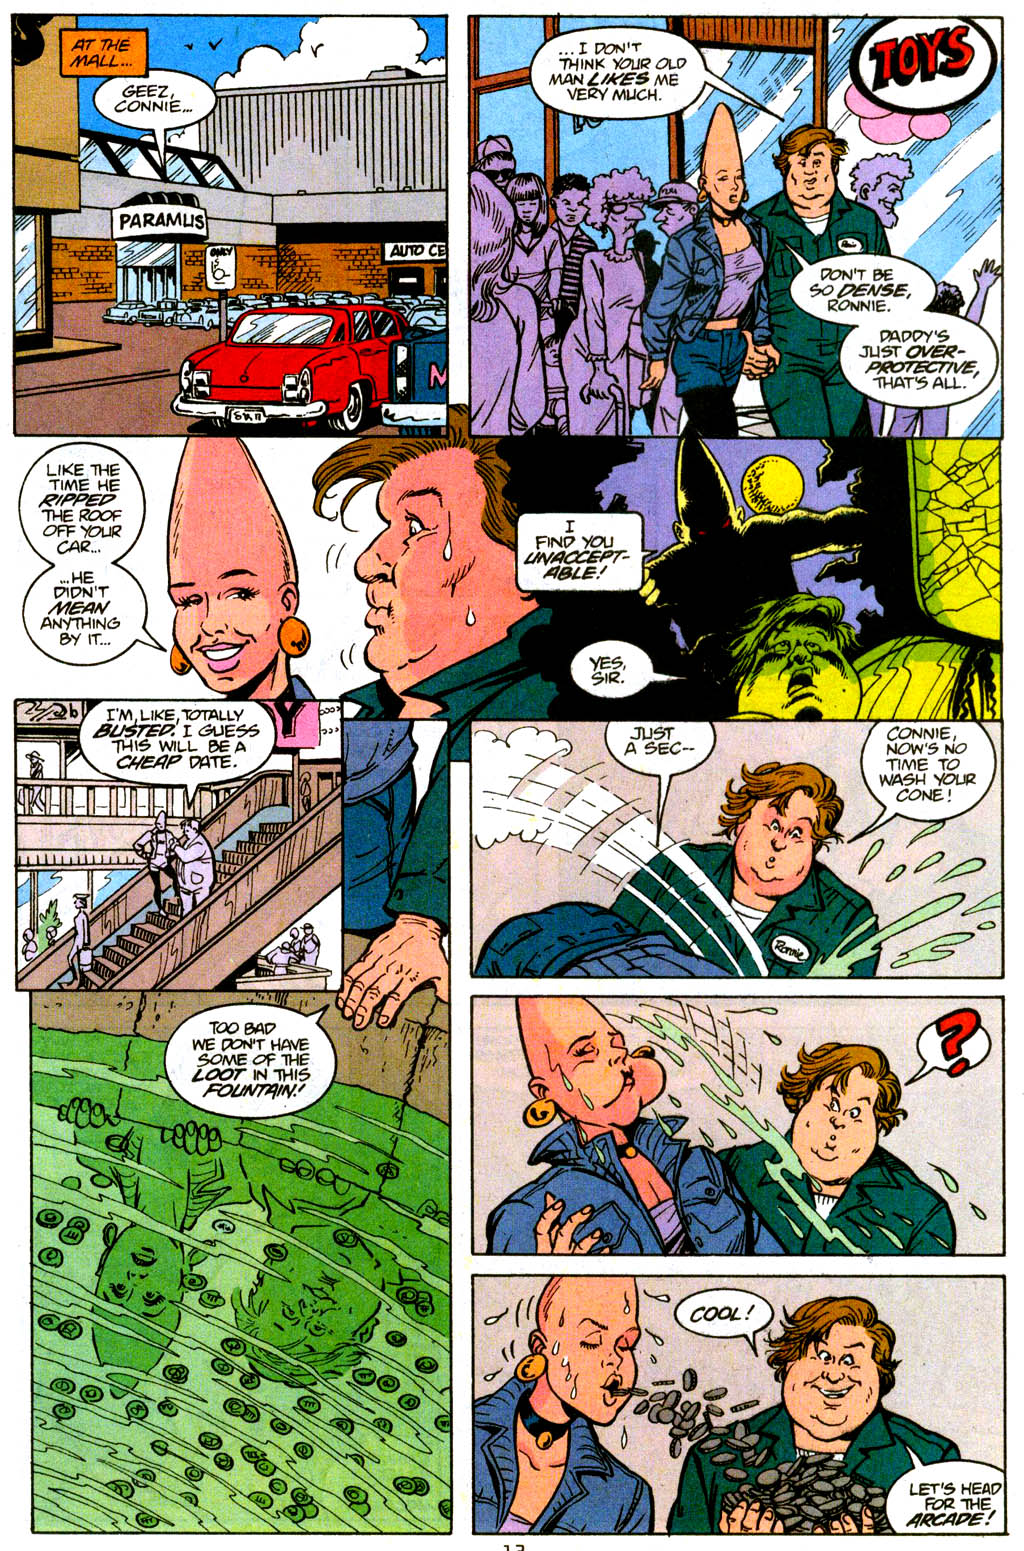 Read online Coneheads comic -  Issue #1 - 9